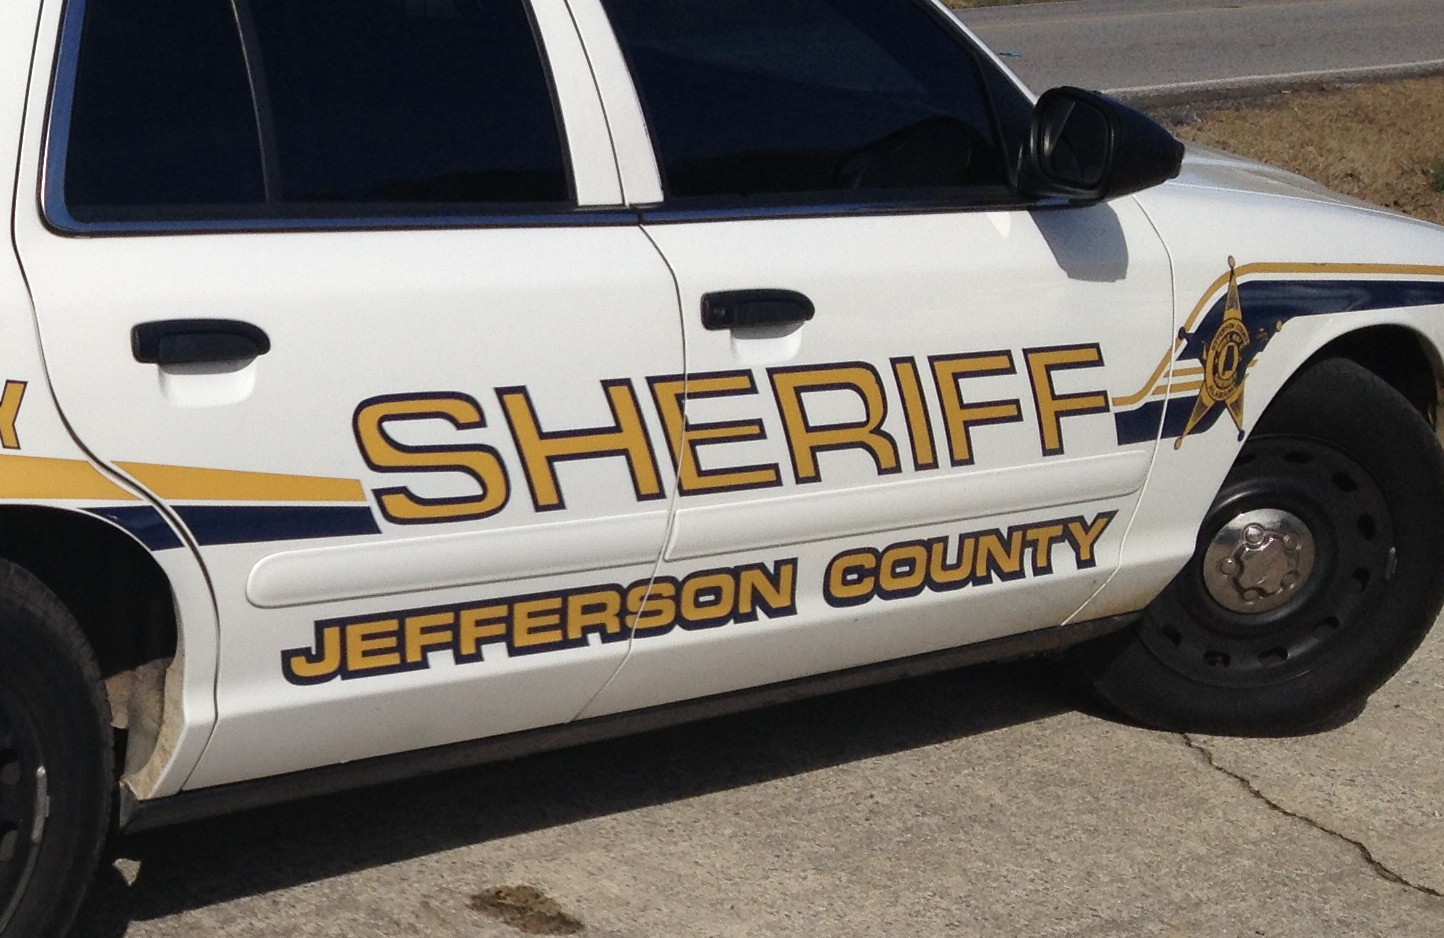 Two teens in custody after morning burglary between Pinson and Clay